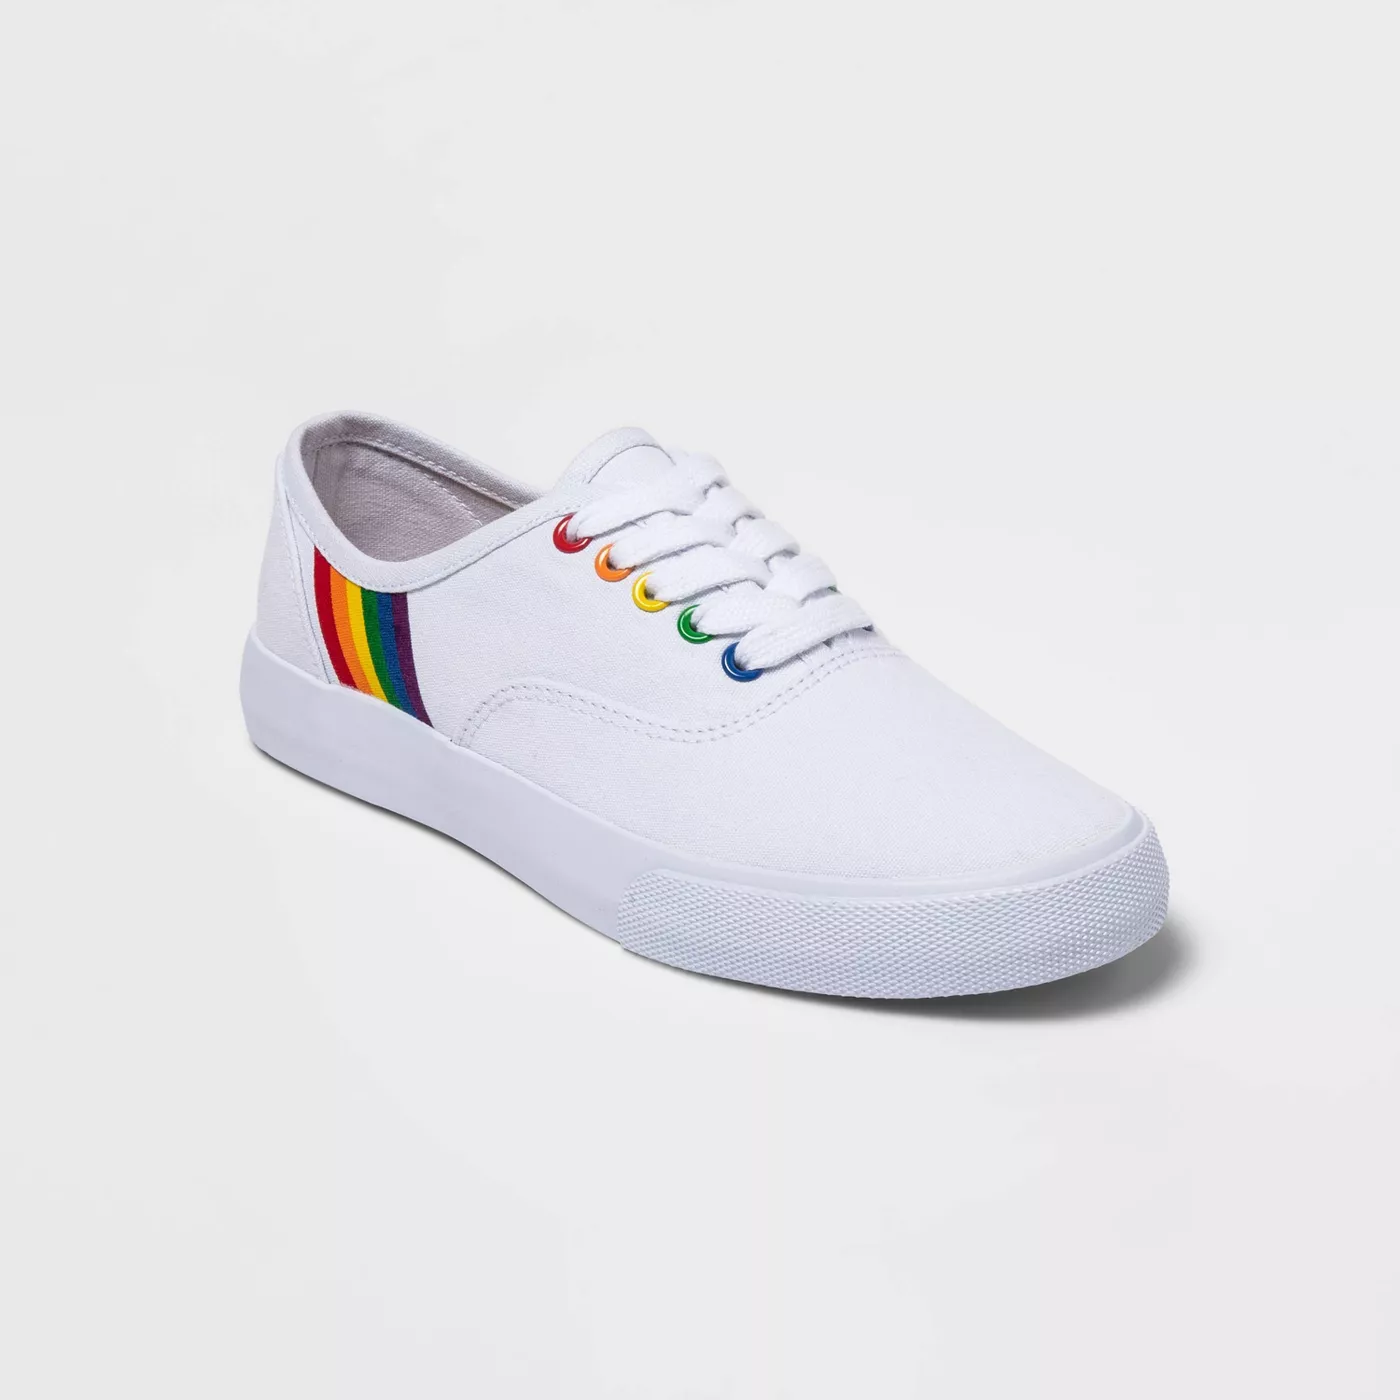 Pride Gender Inclusive Adult Sneakers - White - image 1 of 5